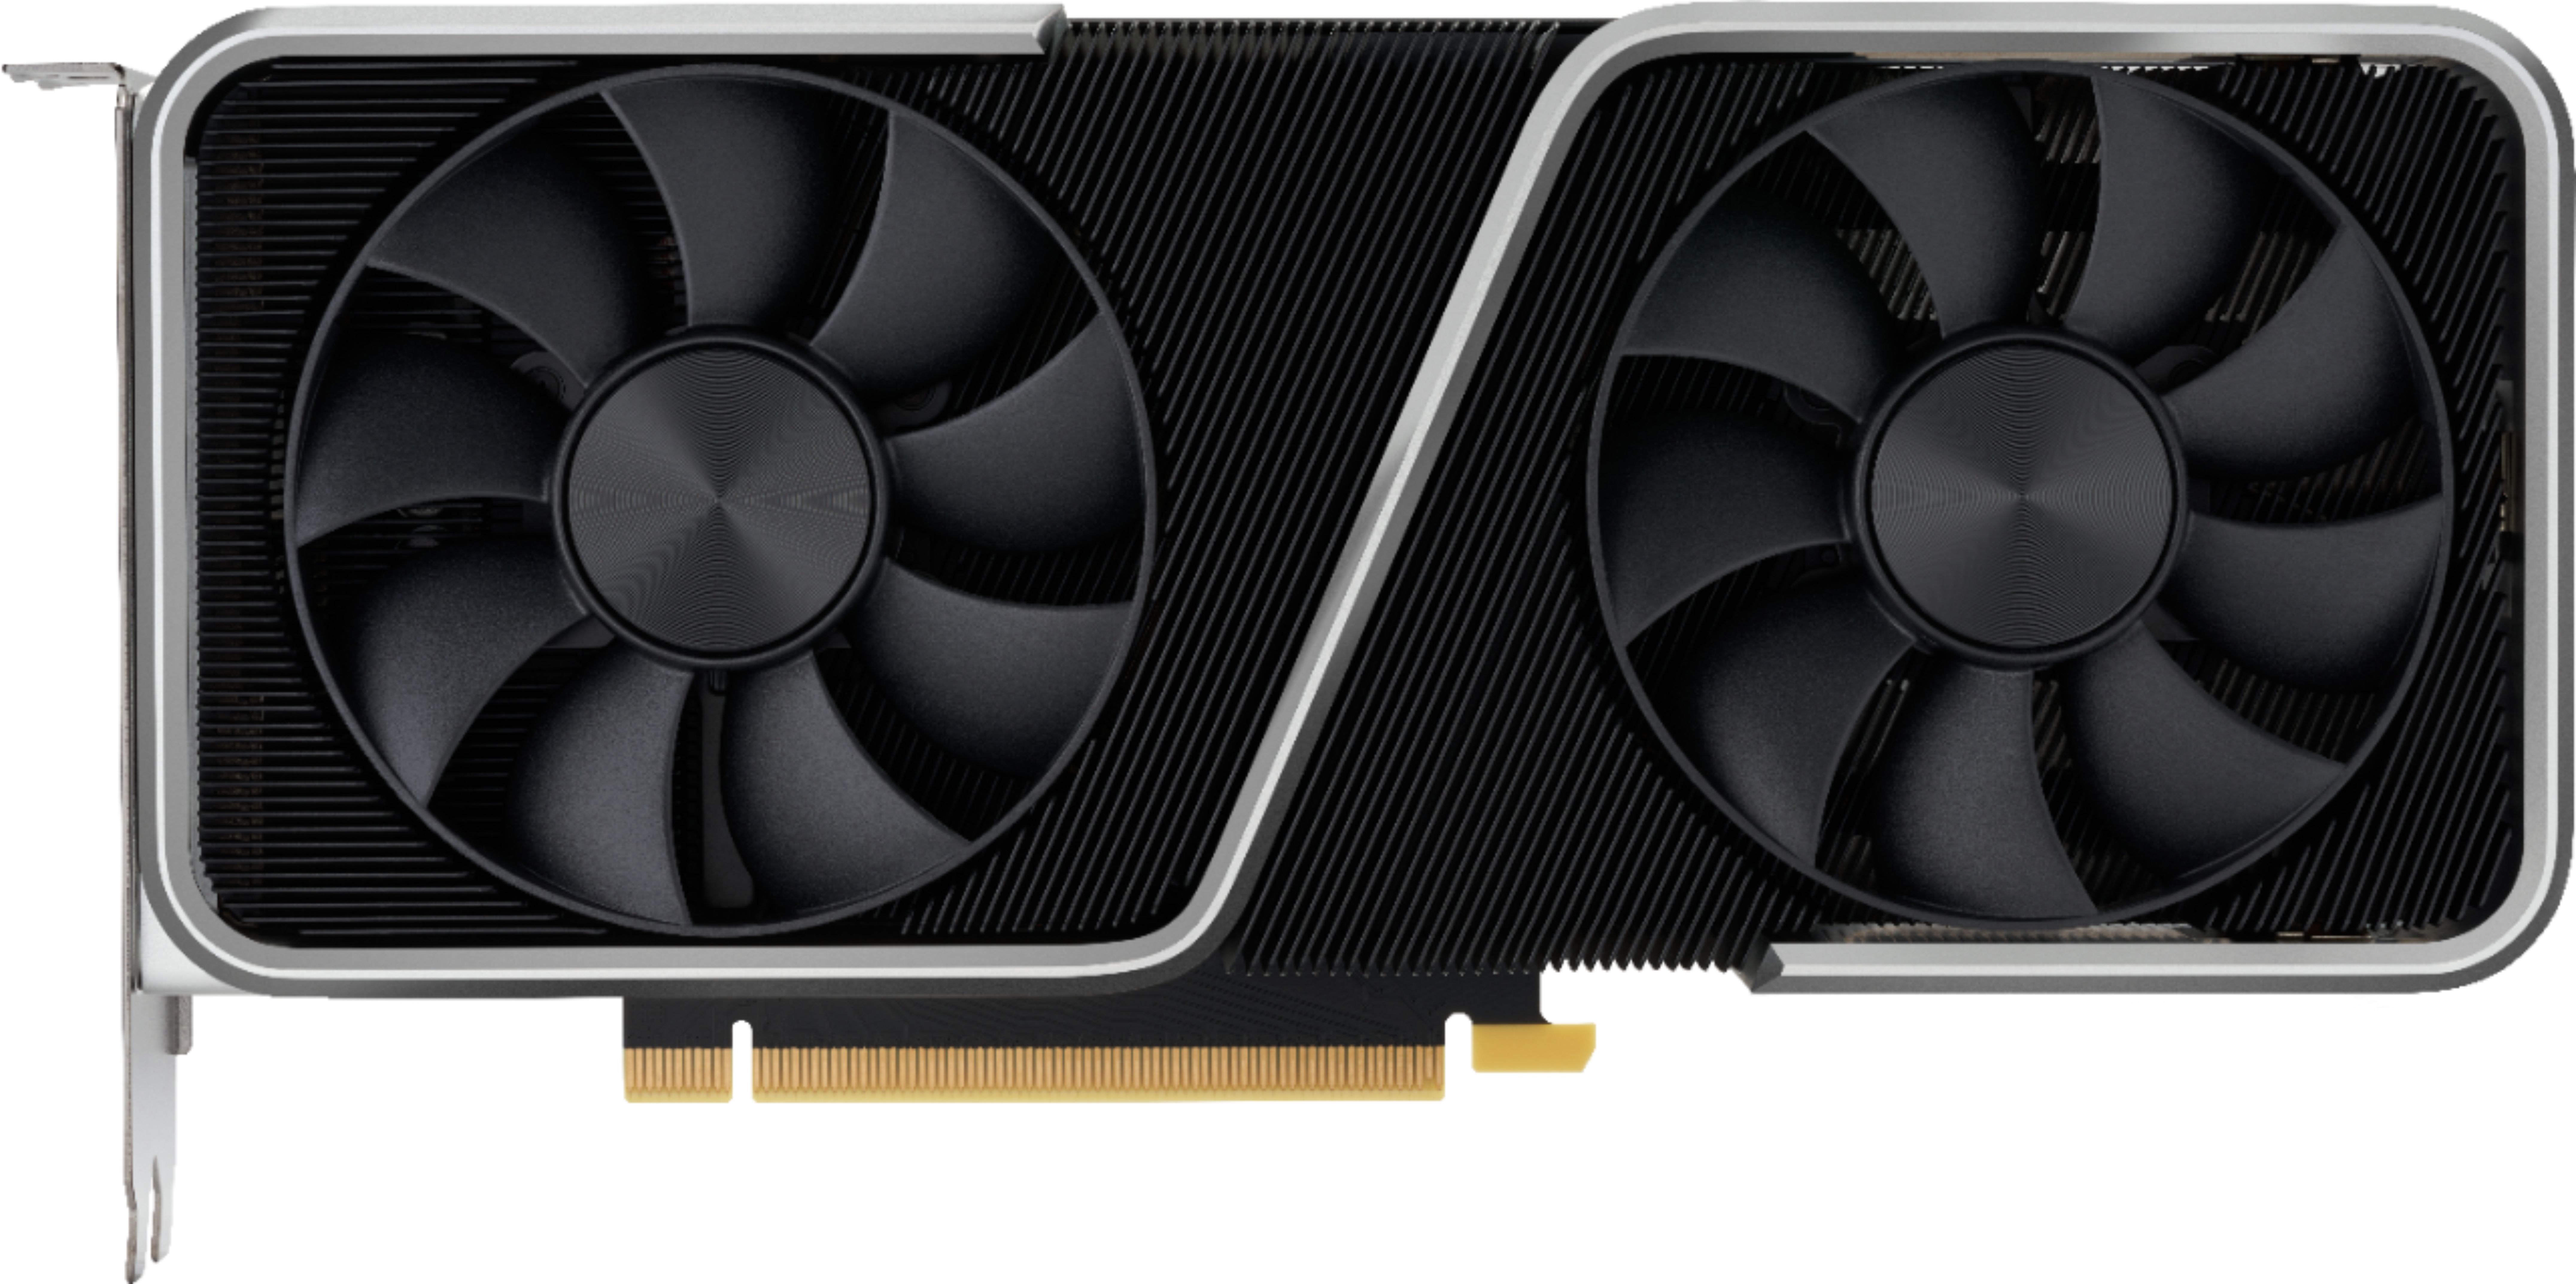 NVIDIA GeForce RTX 3060 Ti 8GB GDDR6 PCI Express 4.0 Graphics Card Steel and Black 900-1G142-2520-000 - Best Buy